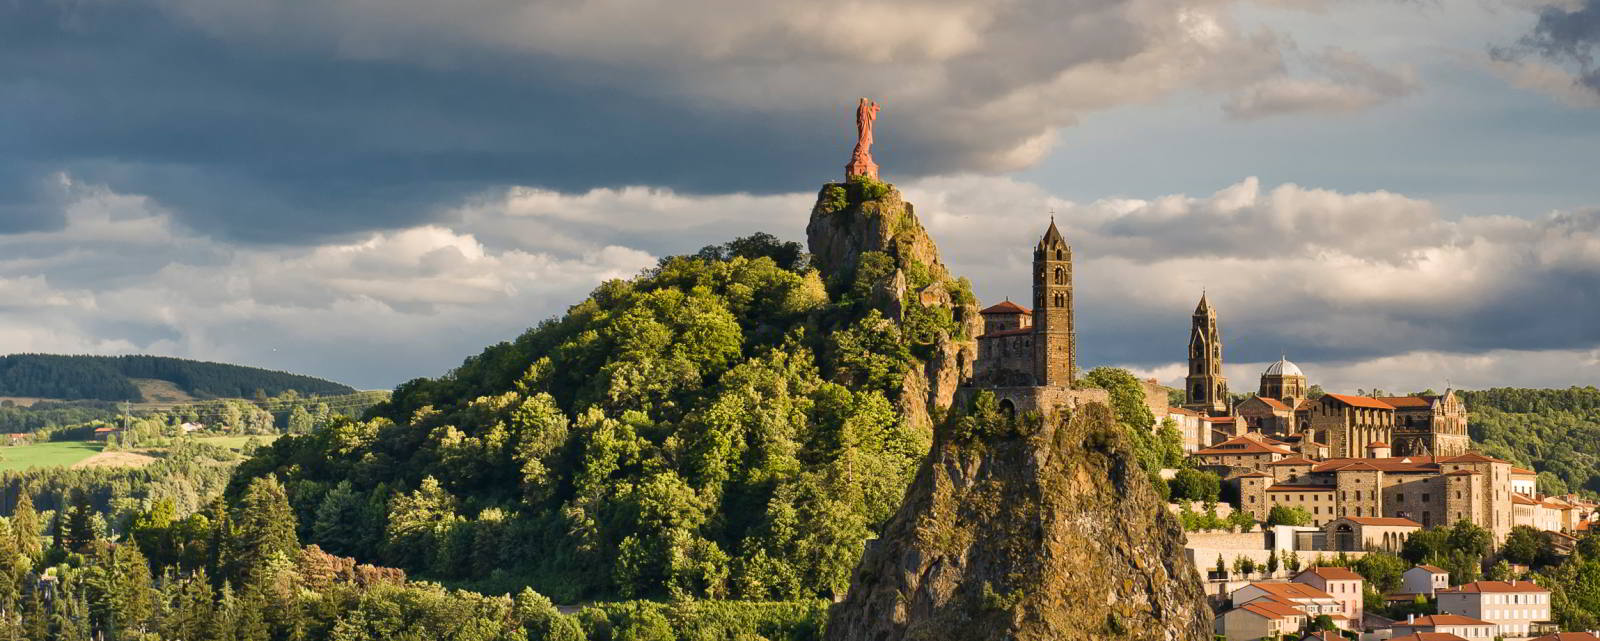 France Auvergne Puy-en-Velay Luxury Holidays with In-Luxe Travel France, The bespoke luxury holidays in France specialist since 2007